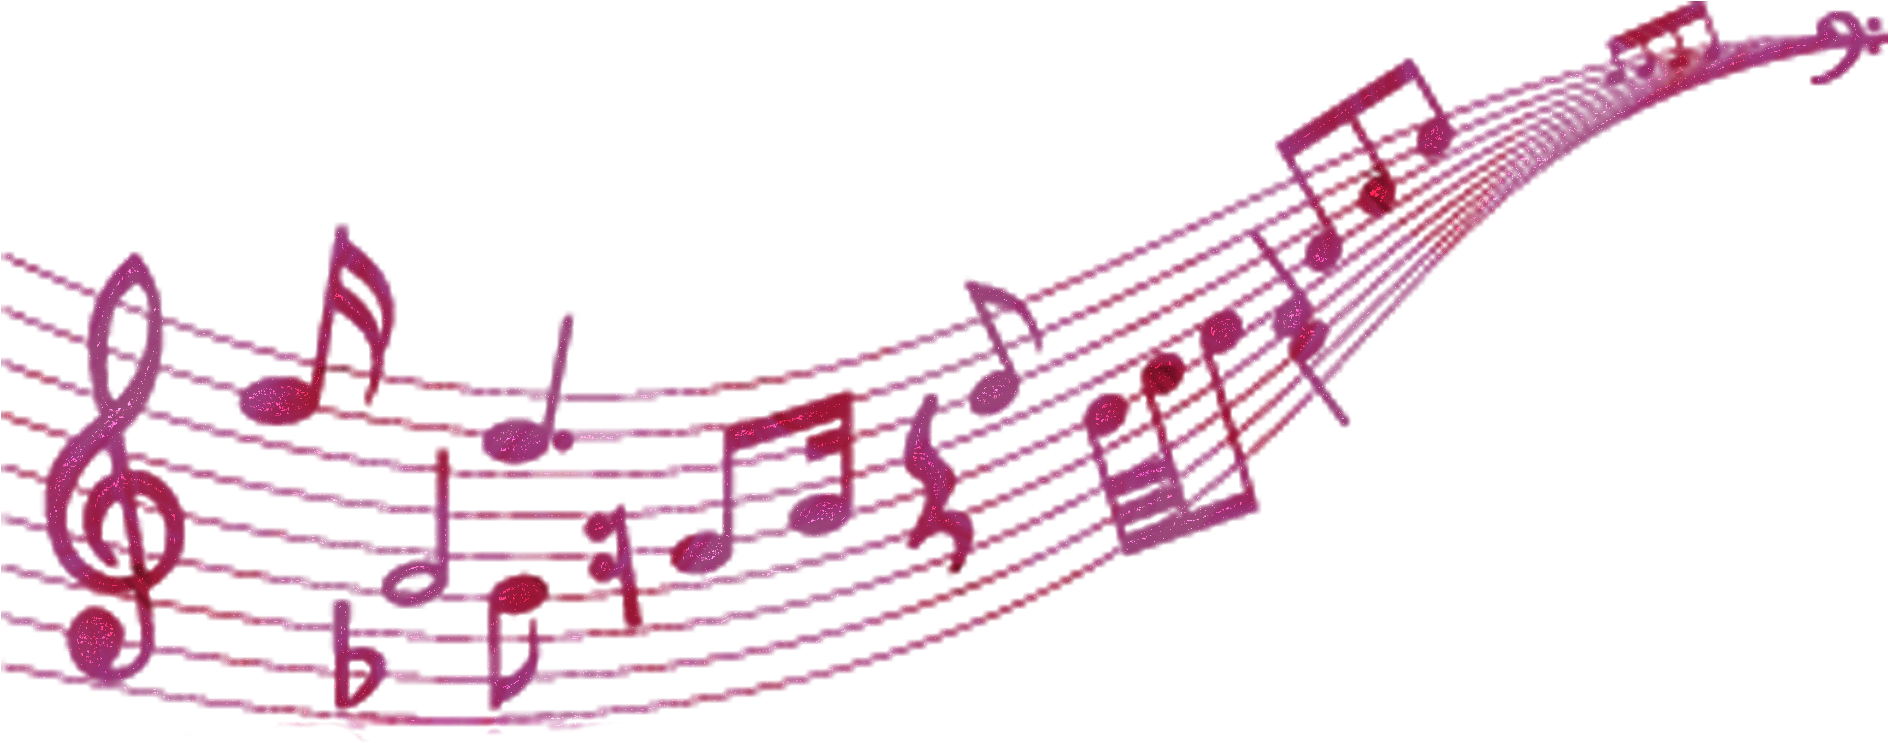 Abstract Musical Notes Wave PNG image